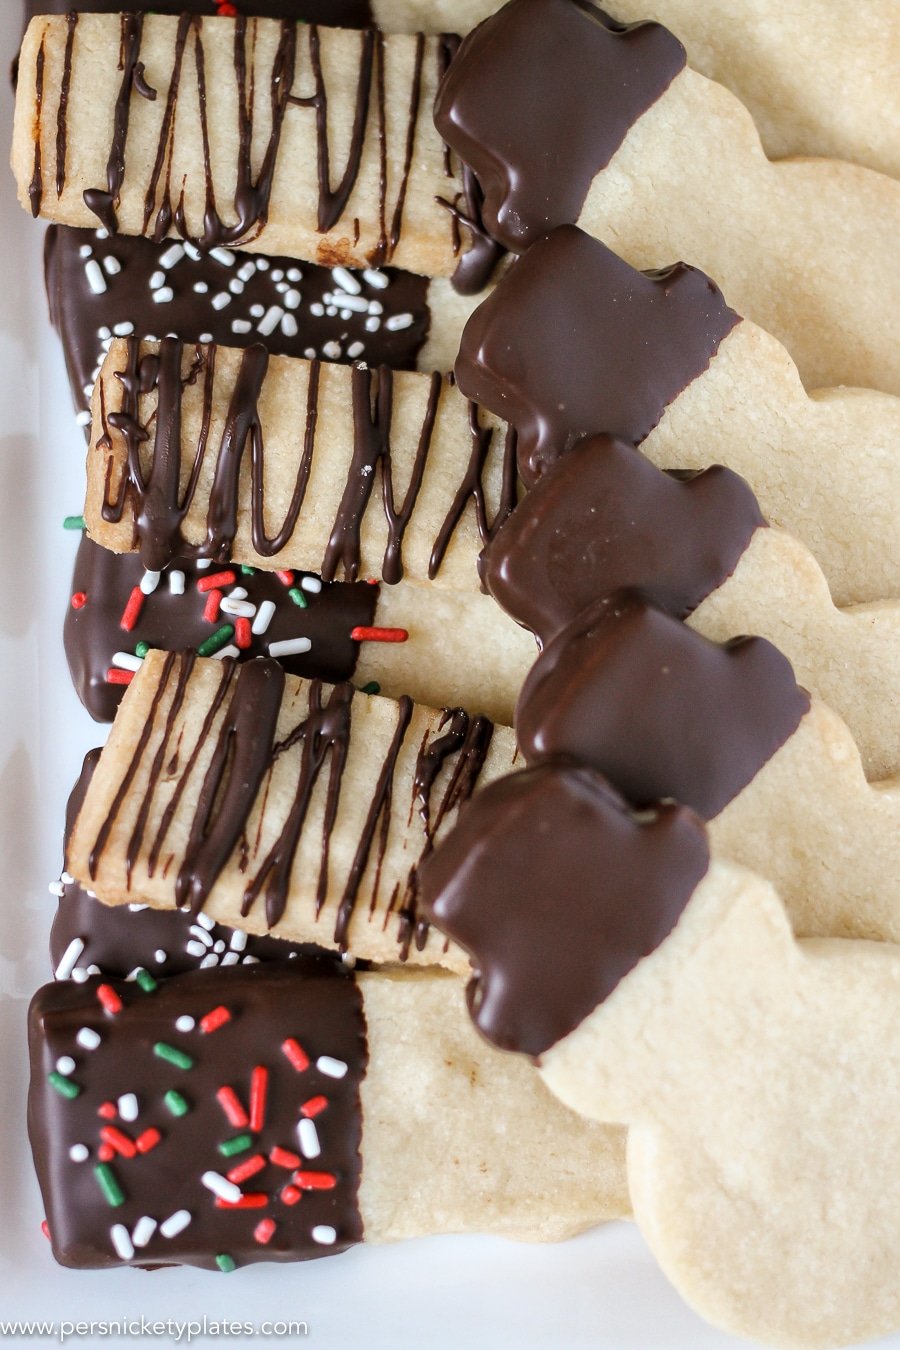 platter of chocolate dipped shortbread cookies in rectangles & snowman shapes